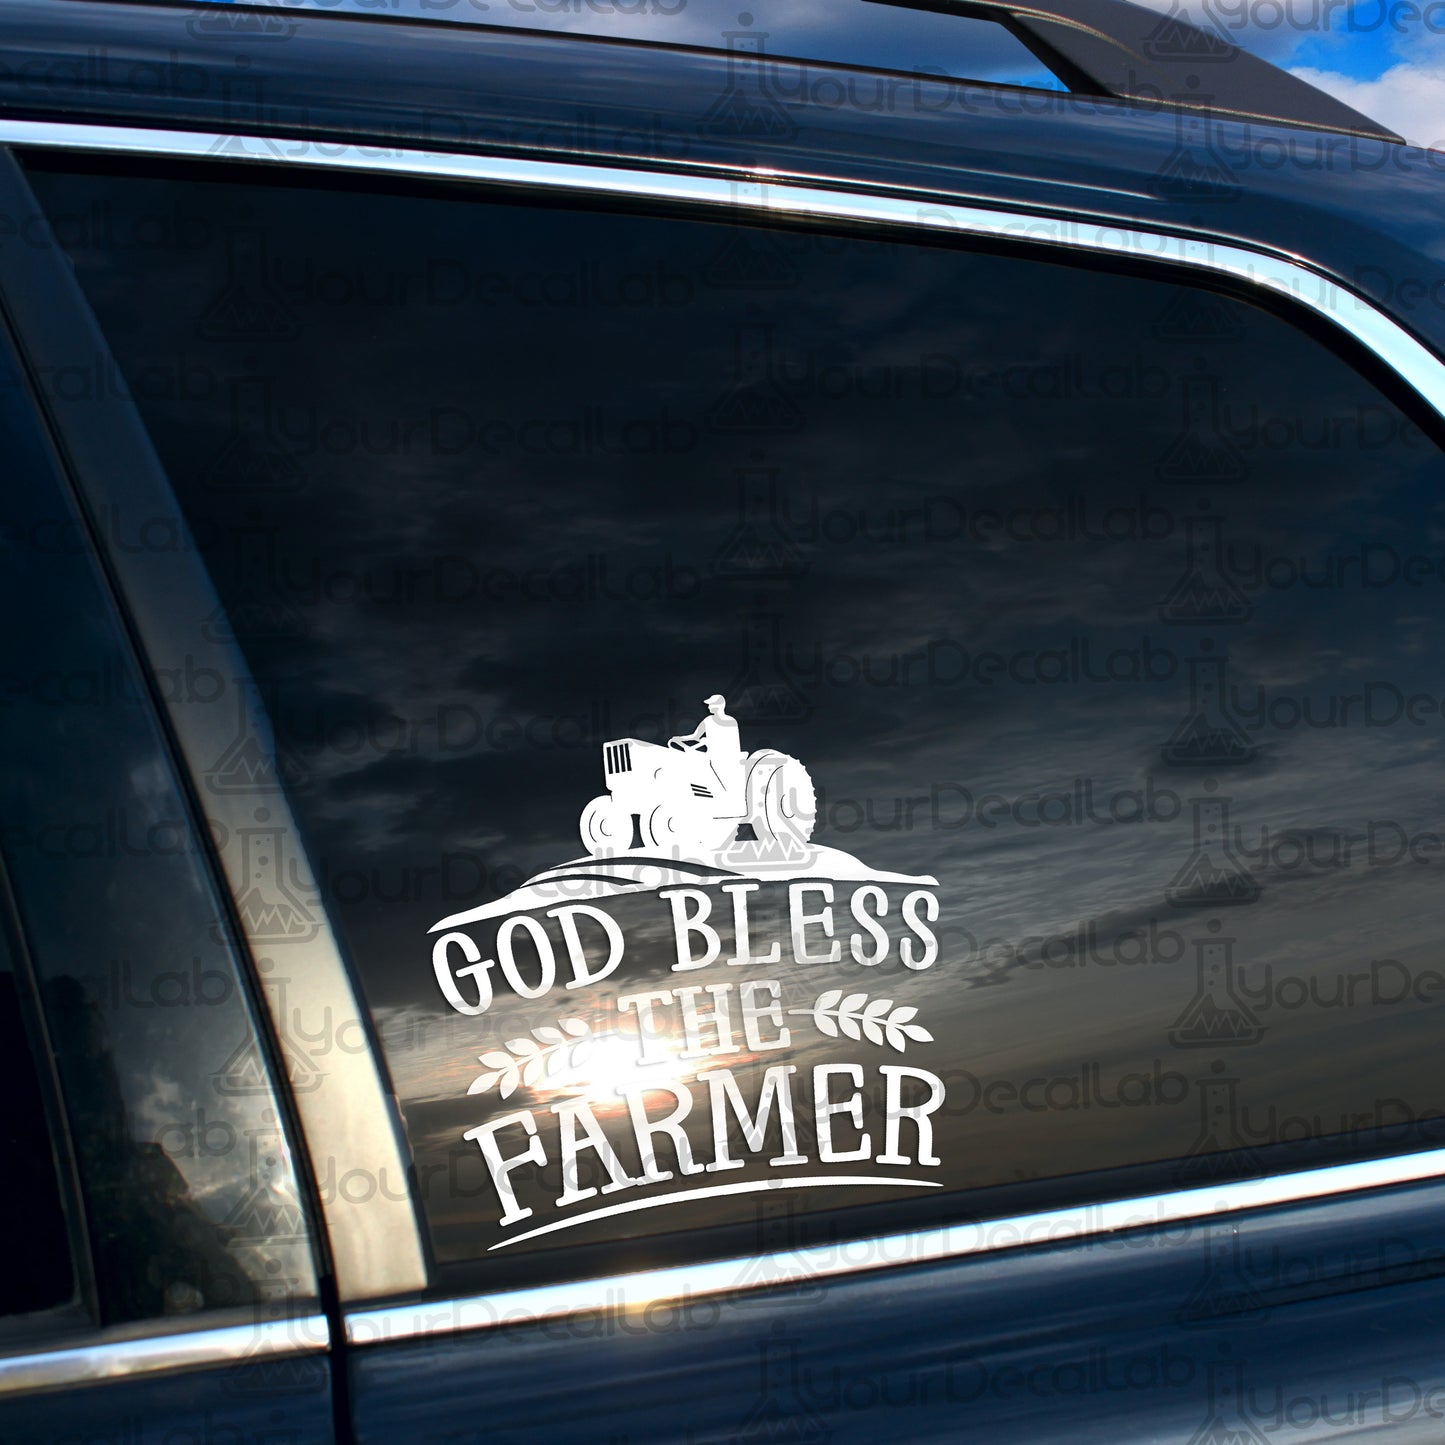 a sticker on the side of a car that says god bless the farmer